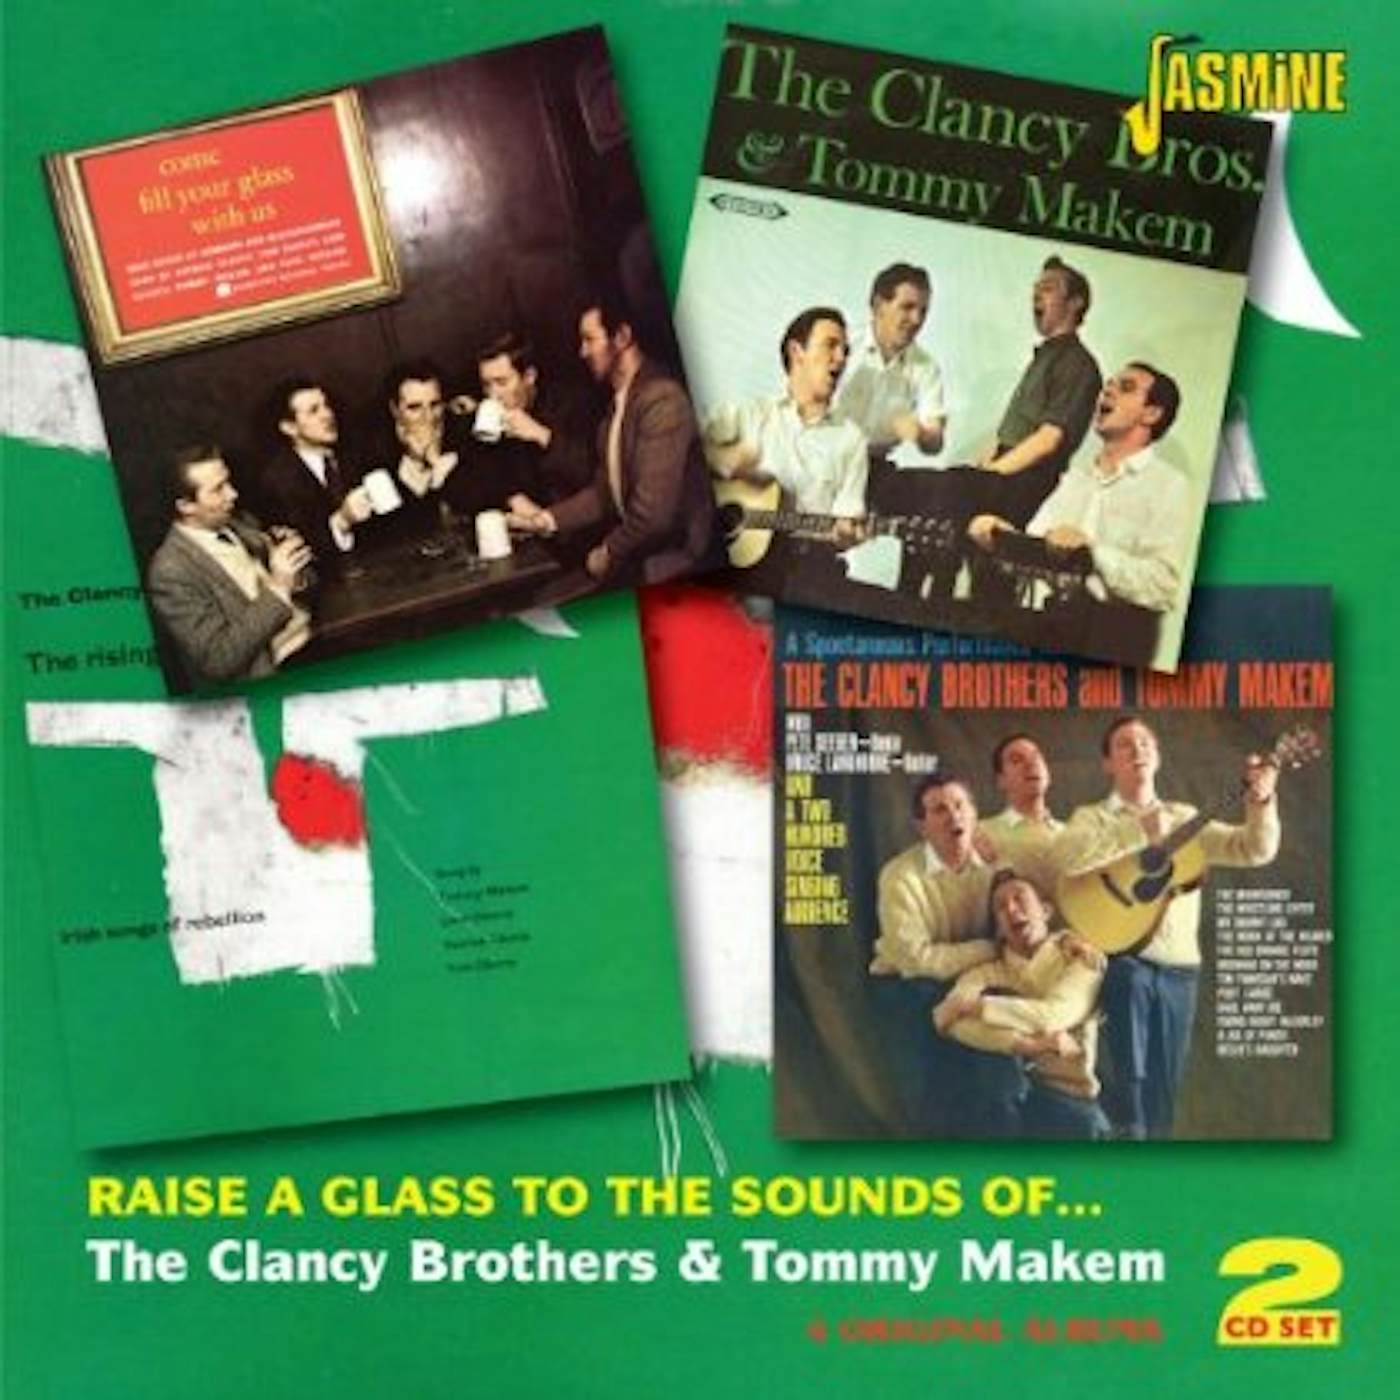 The Clancy Brothers RAISE A GLASS CD